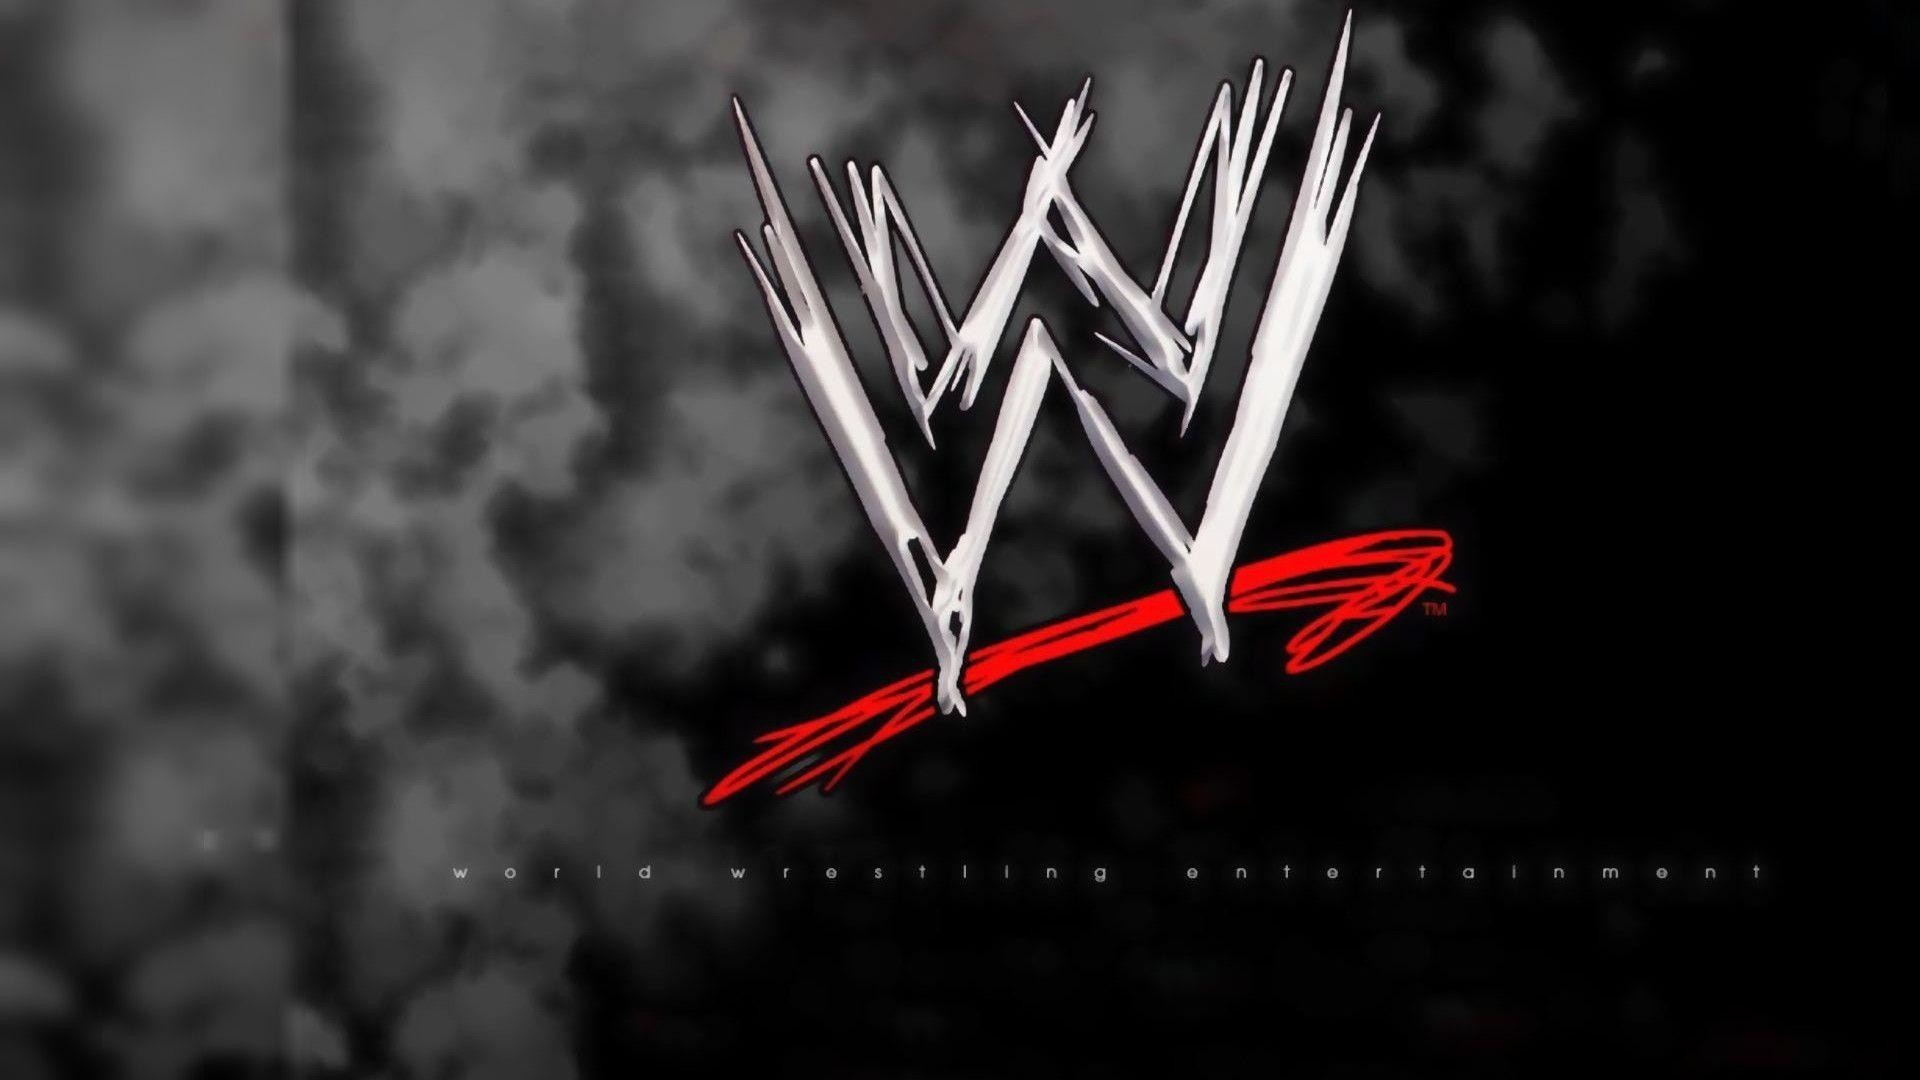 1920x1080  WWE Wallpapers | Free Art Wallpapers